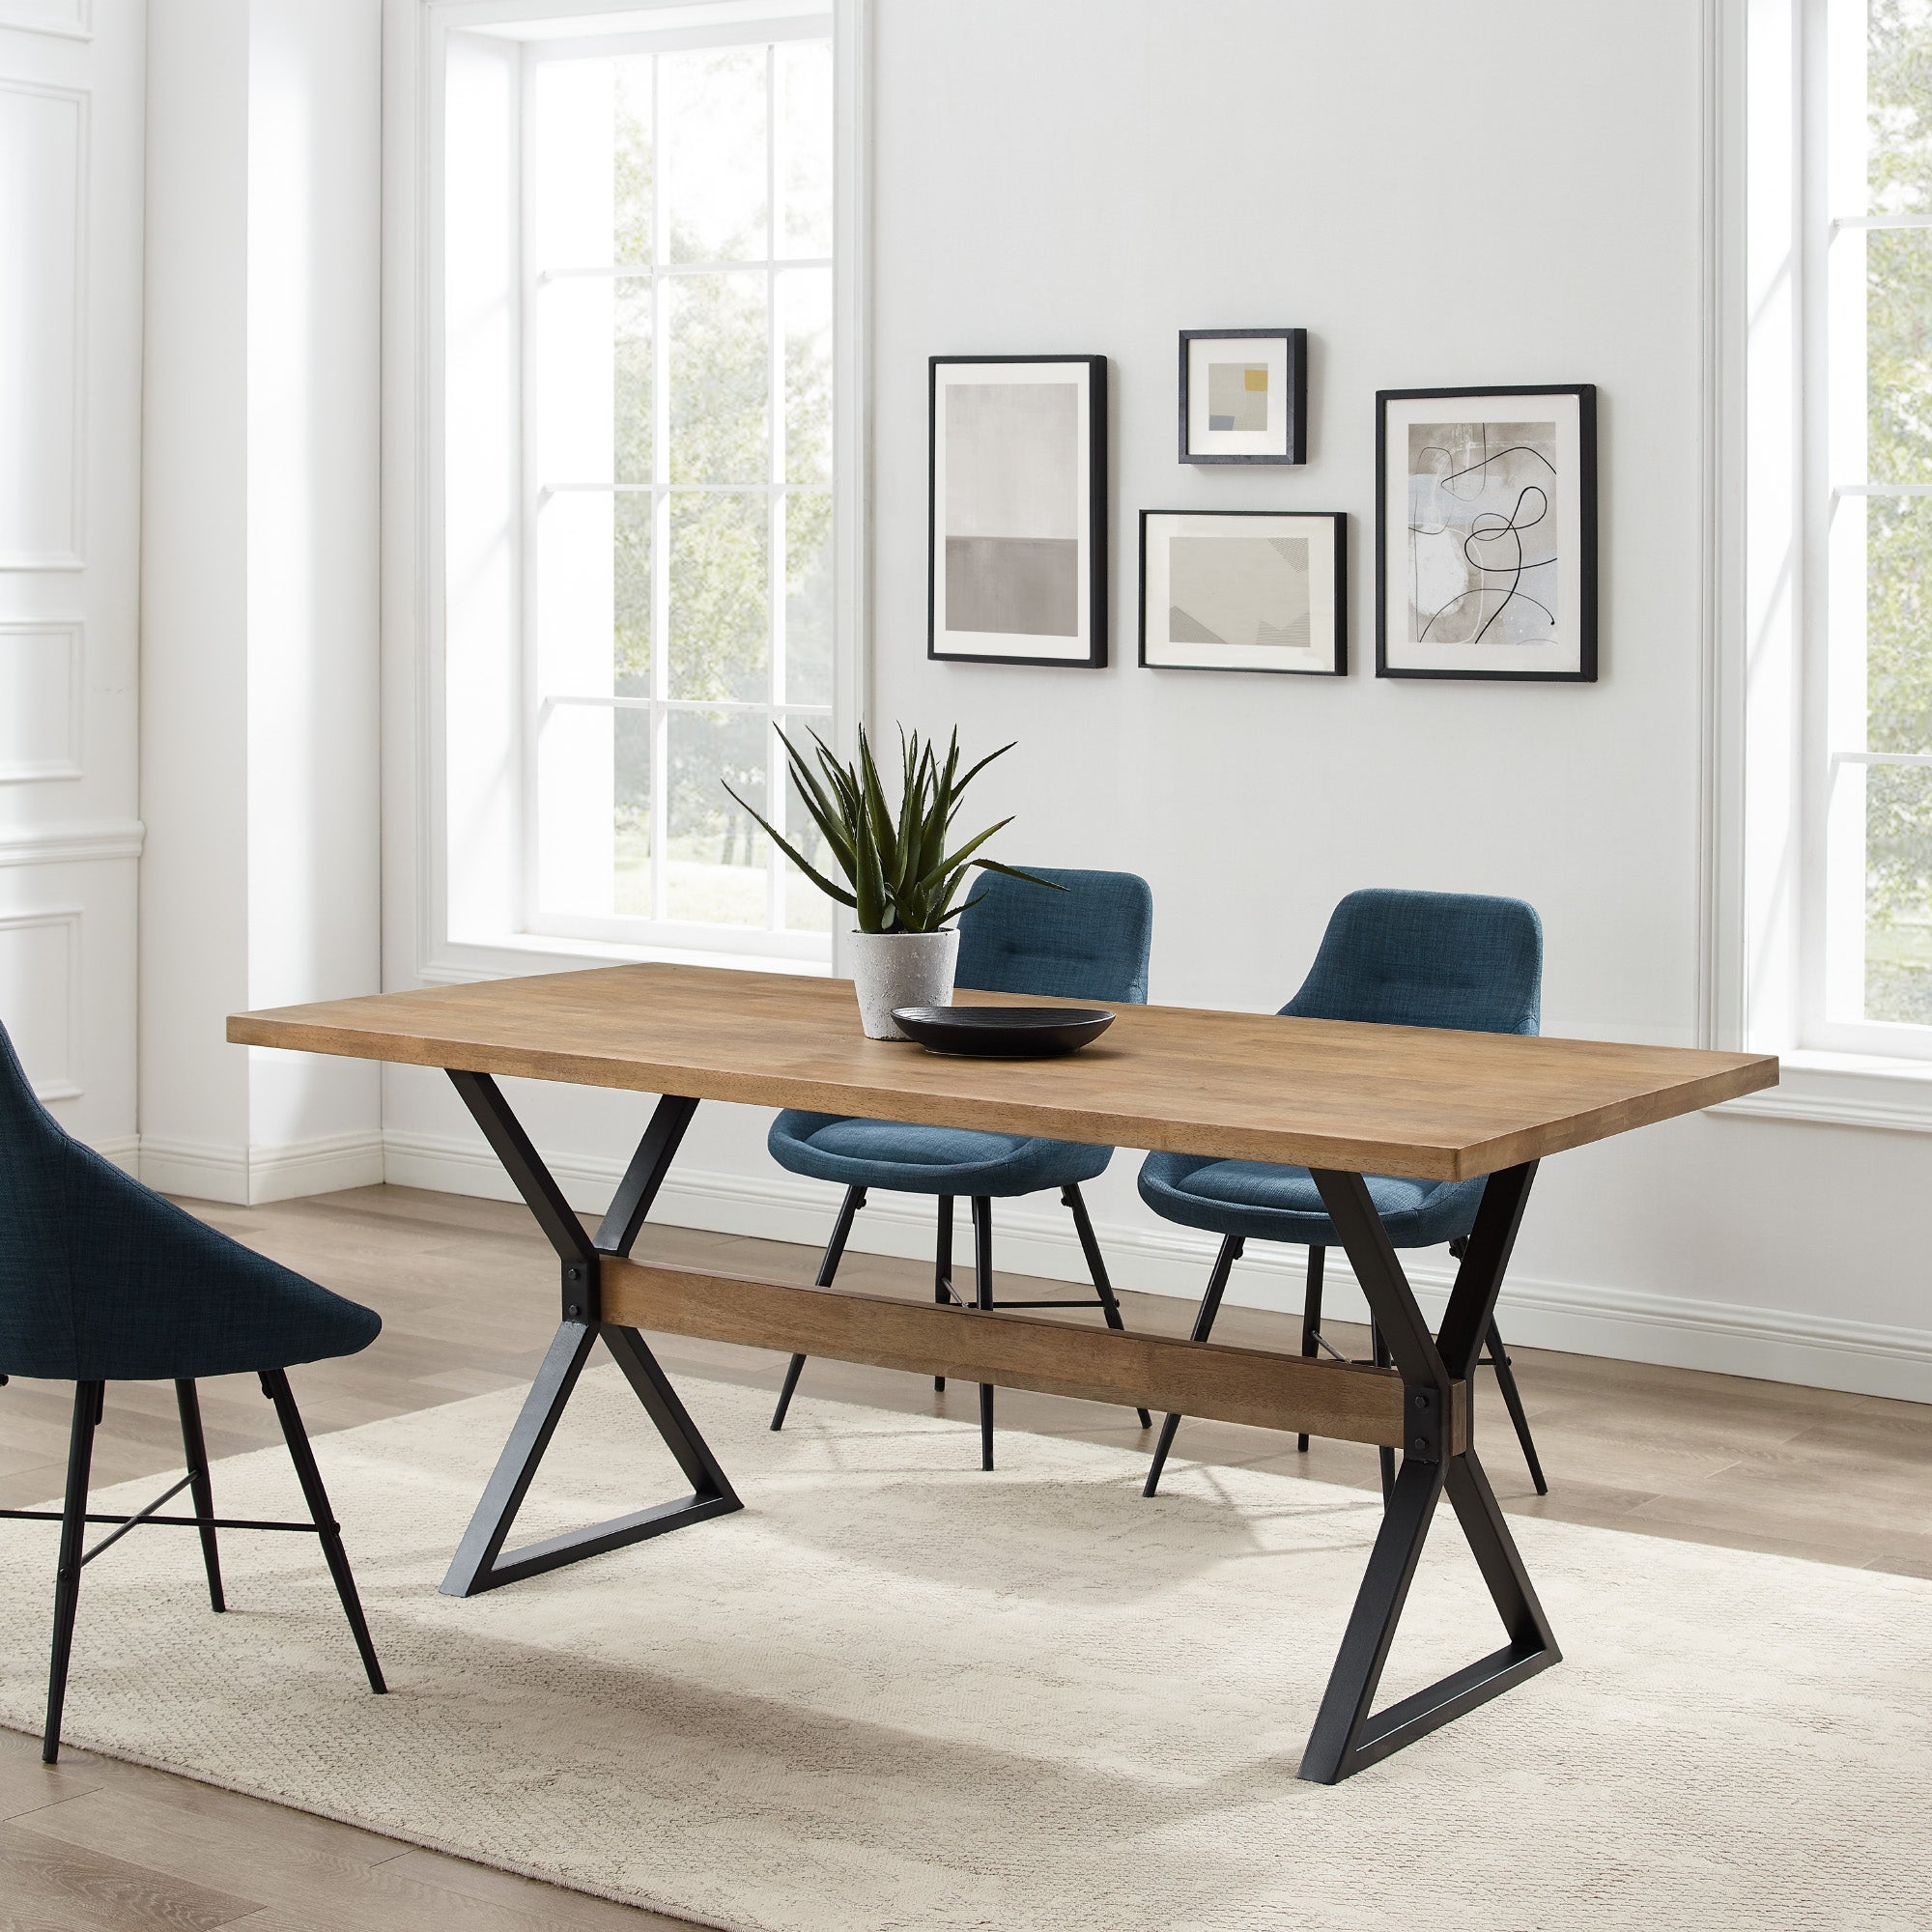 Amherst 72" X Leg Dining Table - East Shore Modern Home Furnishings